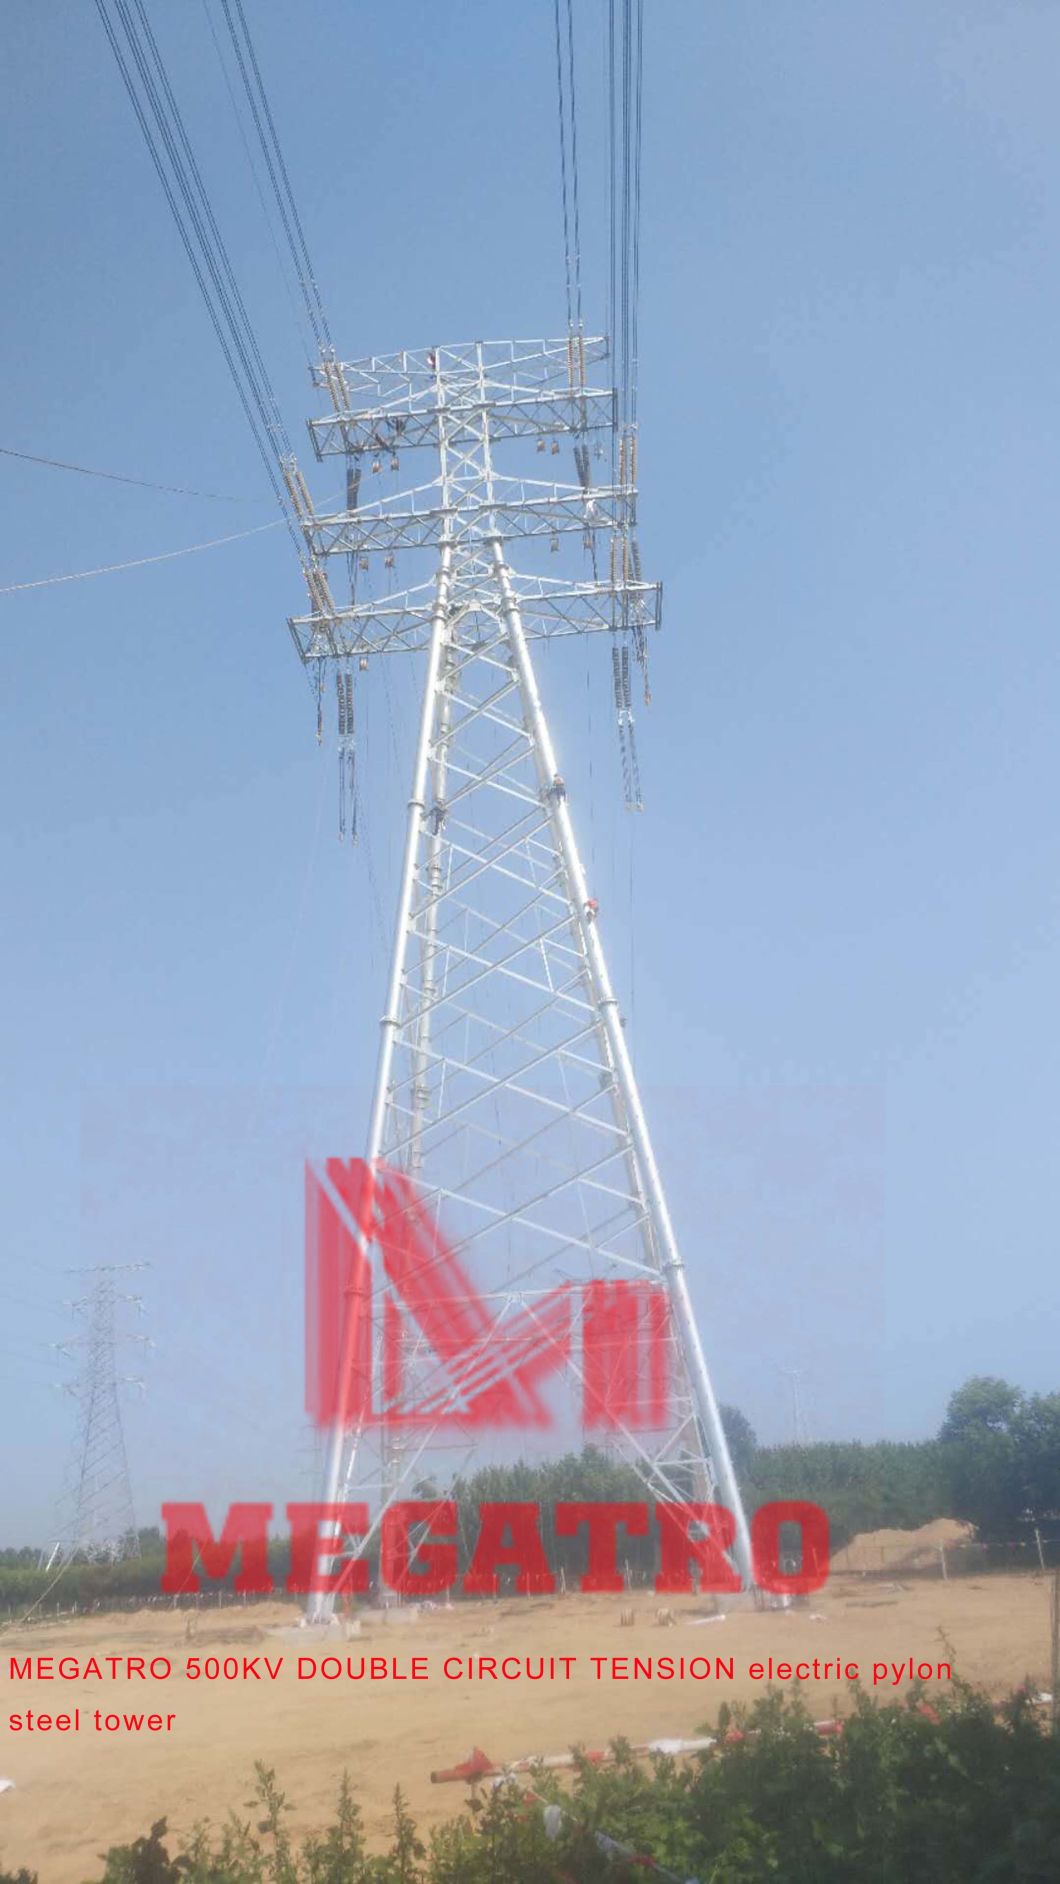 Megatro 500kv Line 5e6 Sj1 Double Circuit Tension and Electric Transmission Steel Tower